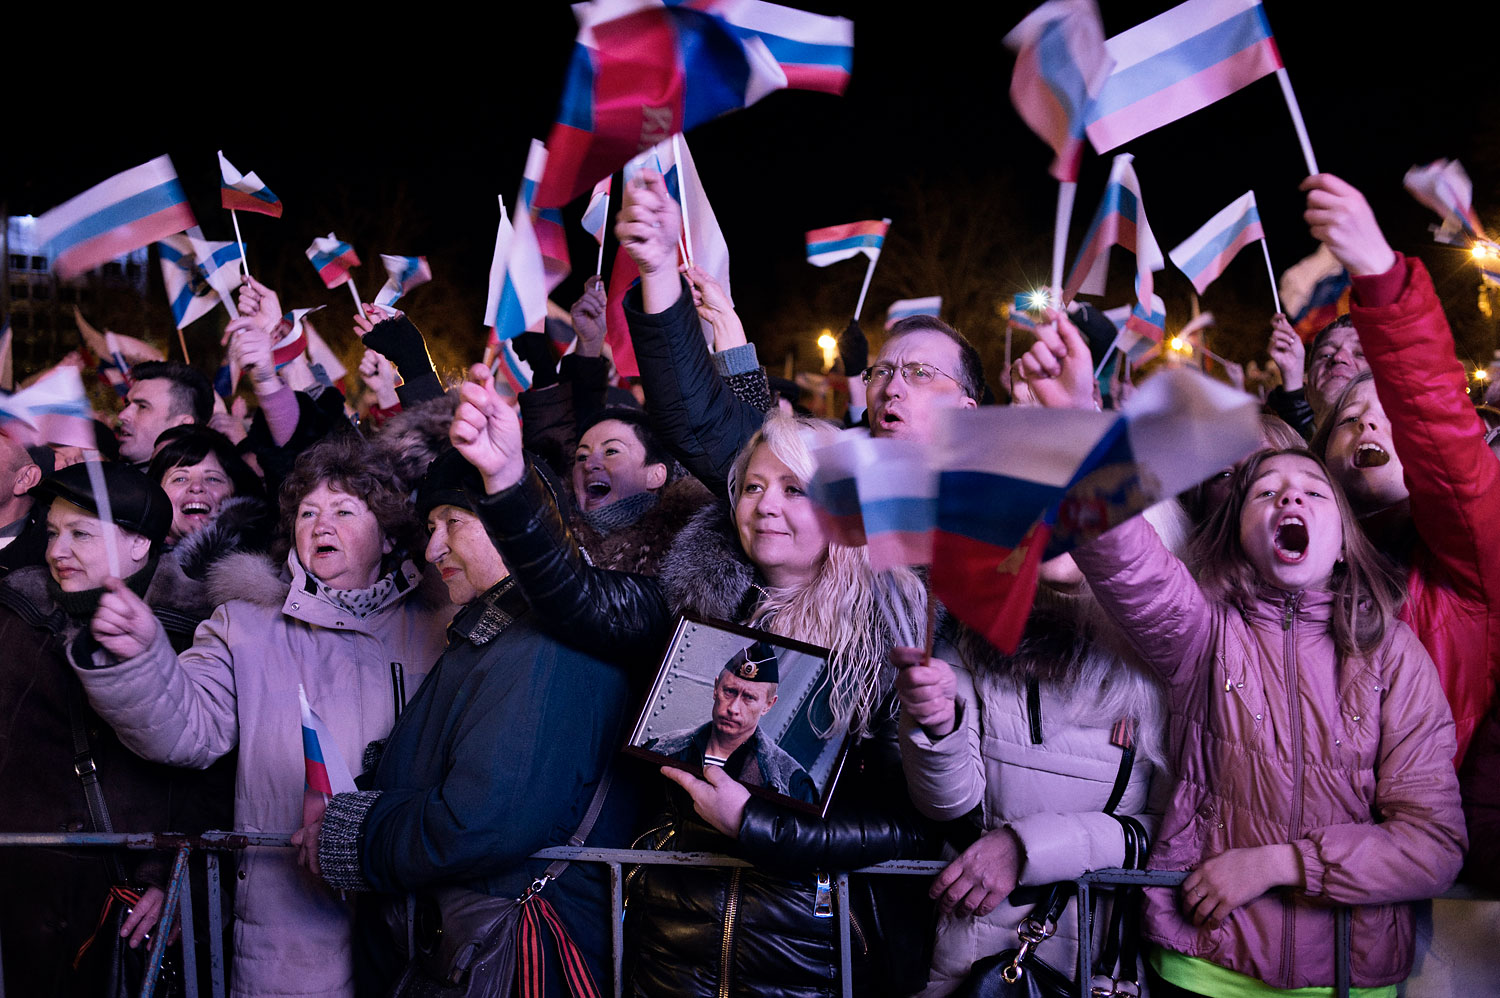 A jubilant crowd waits for the results of the referendum in the Crimean city of Sevastopol on March 16, 2014 (Yuri Kozyrev—NOOR for TIME)